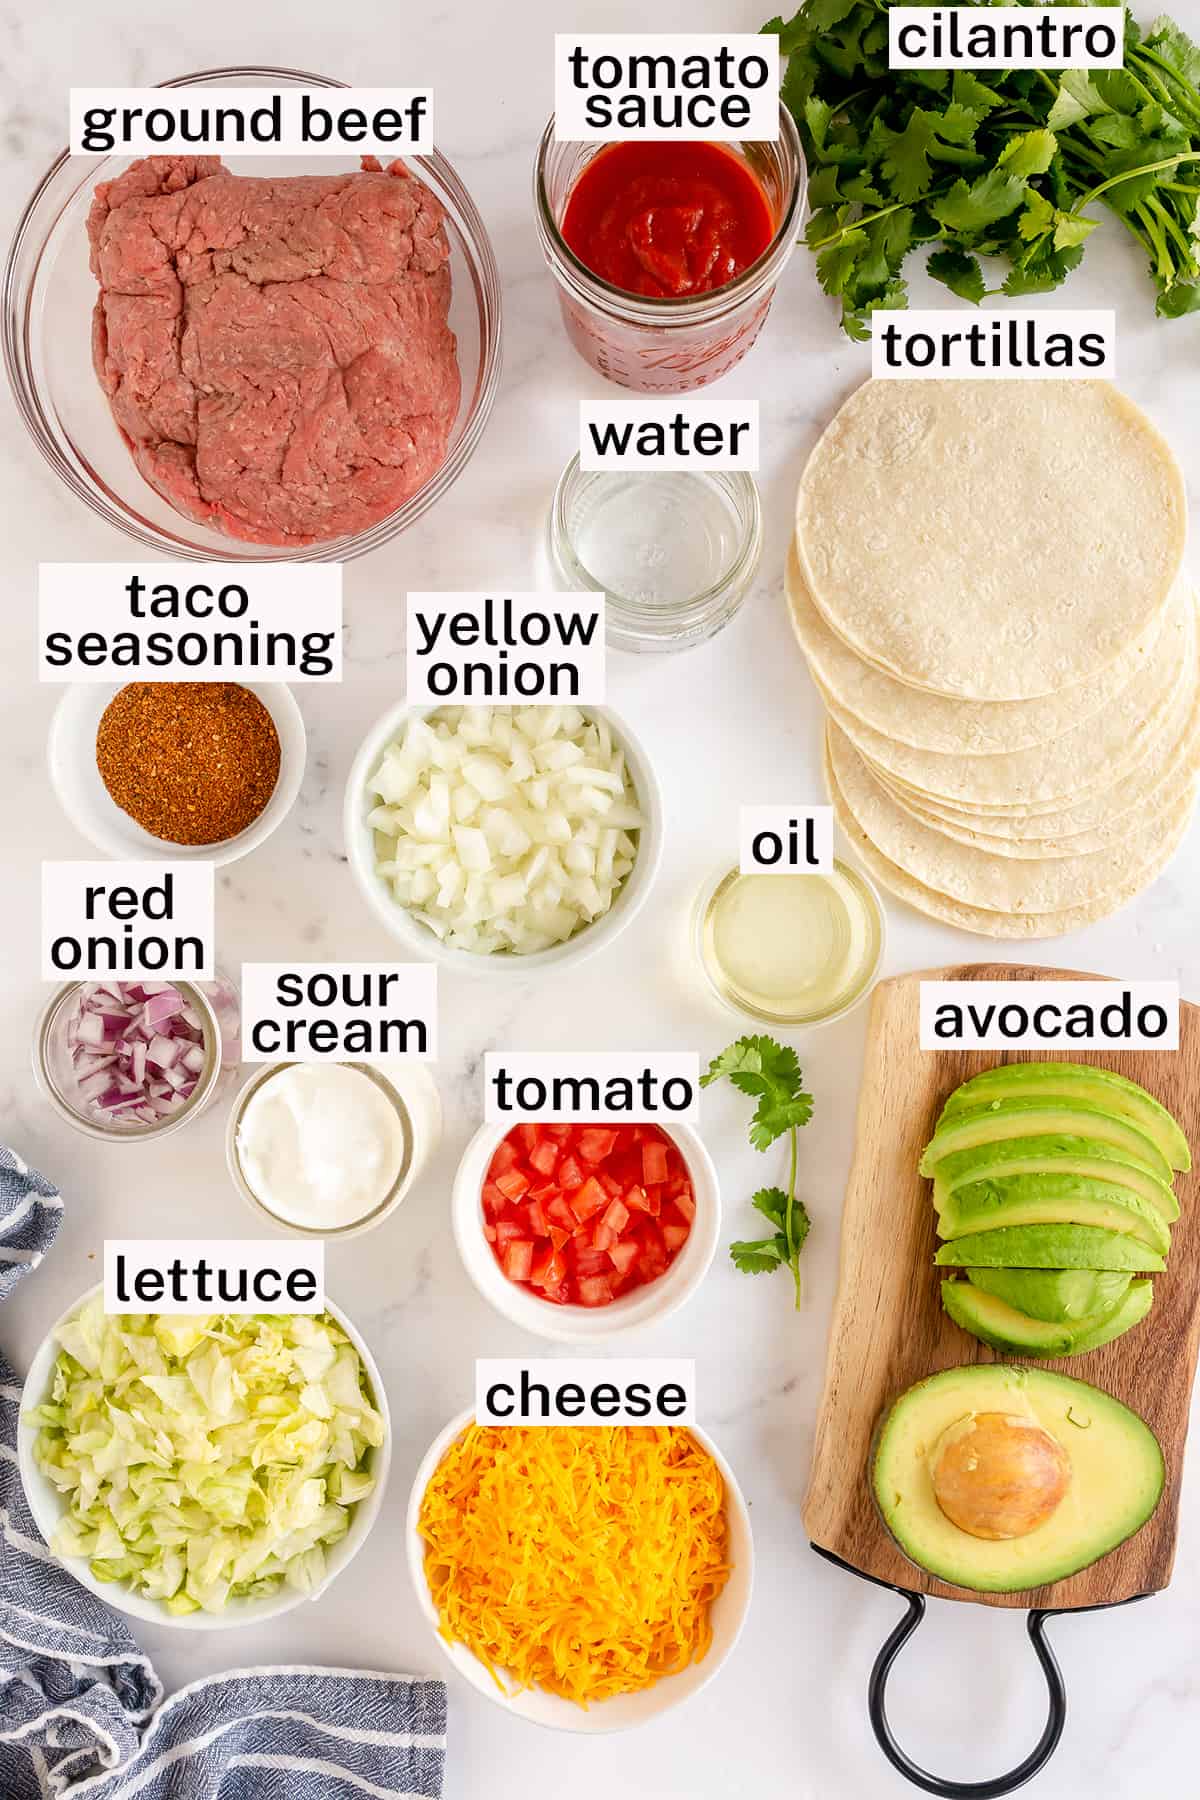 Ingredients and toppings for Ground Beef Tacos.